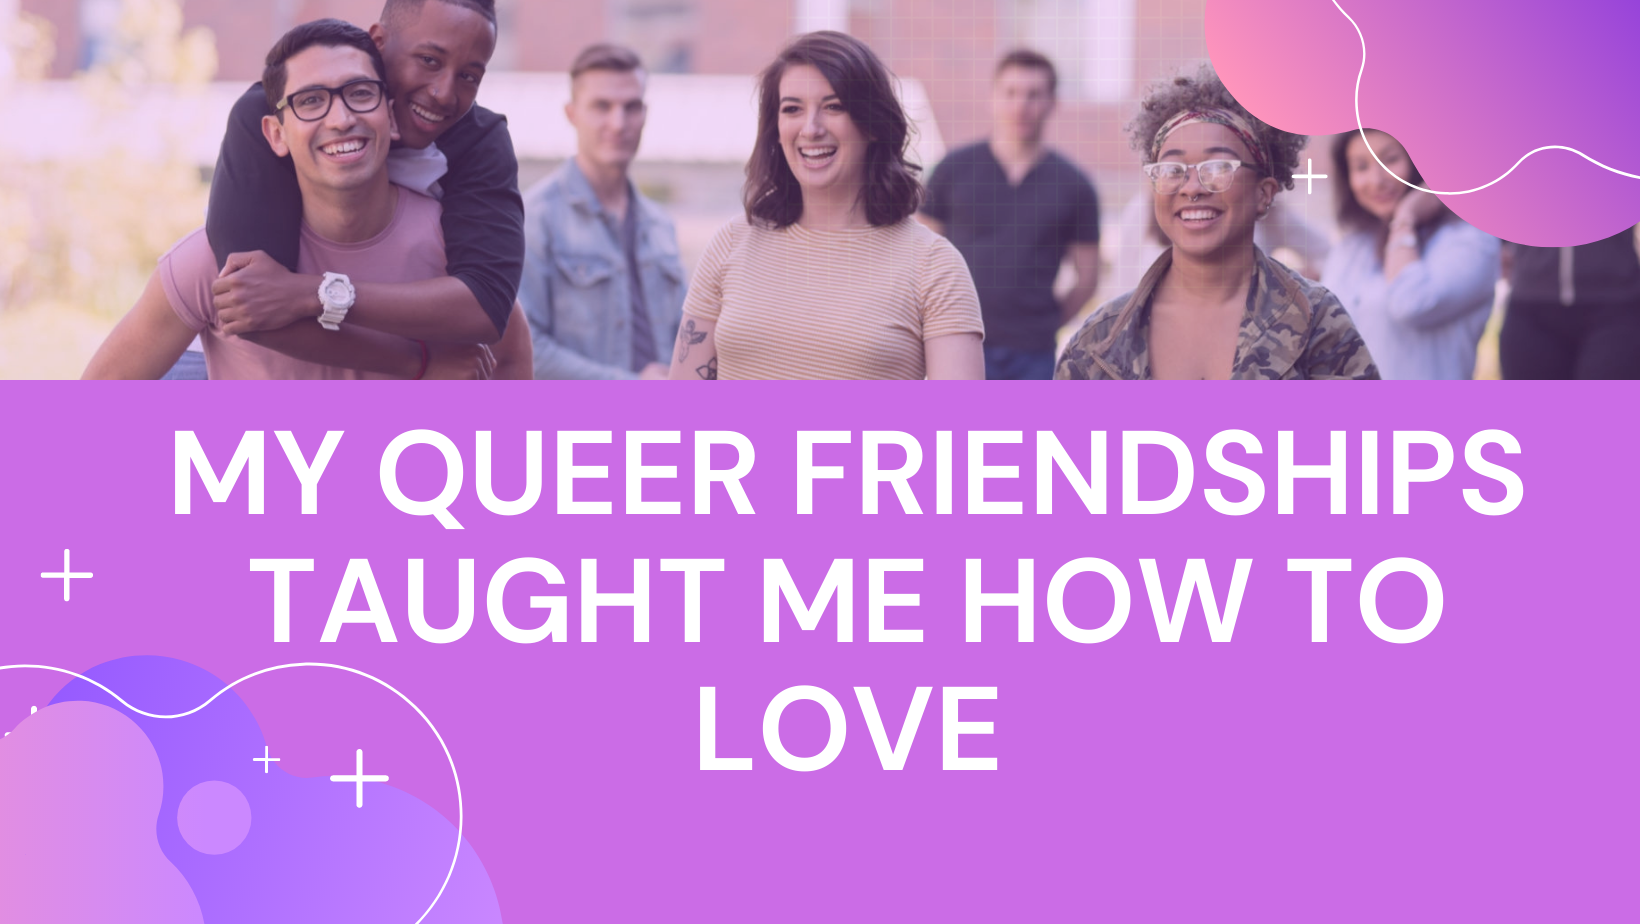 Header of smiling college-age friends. Text reads "My Queer Friendships Taught Me How to Love"